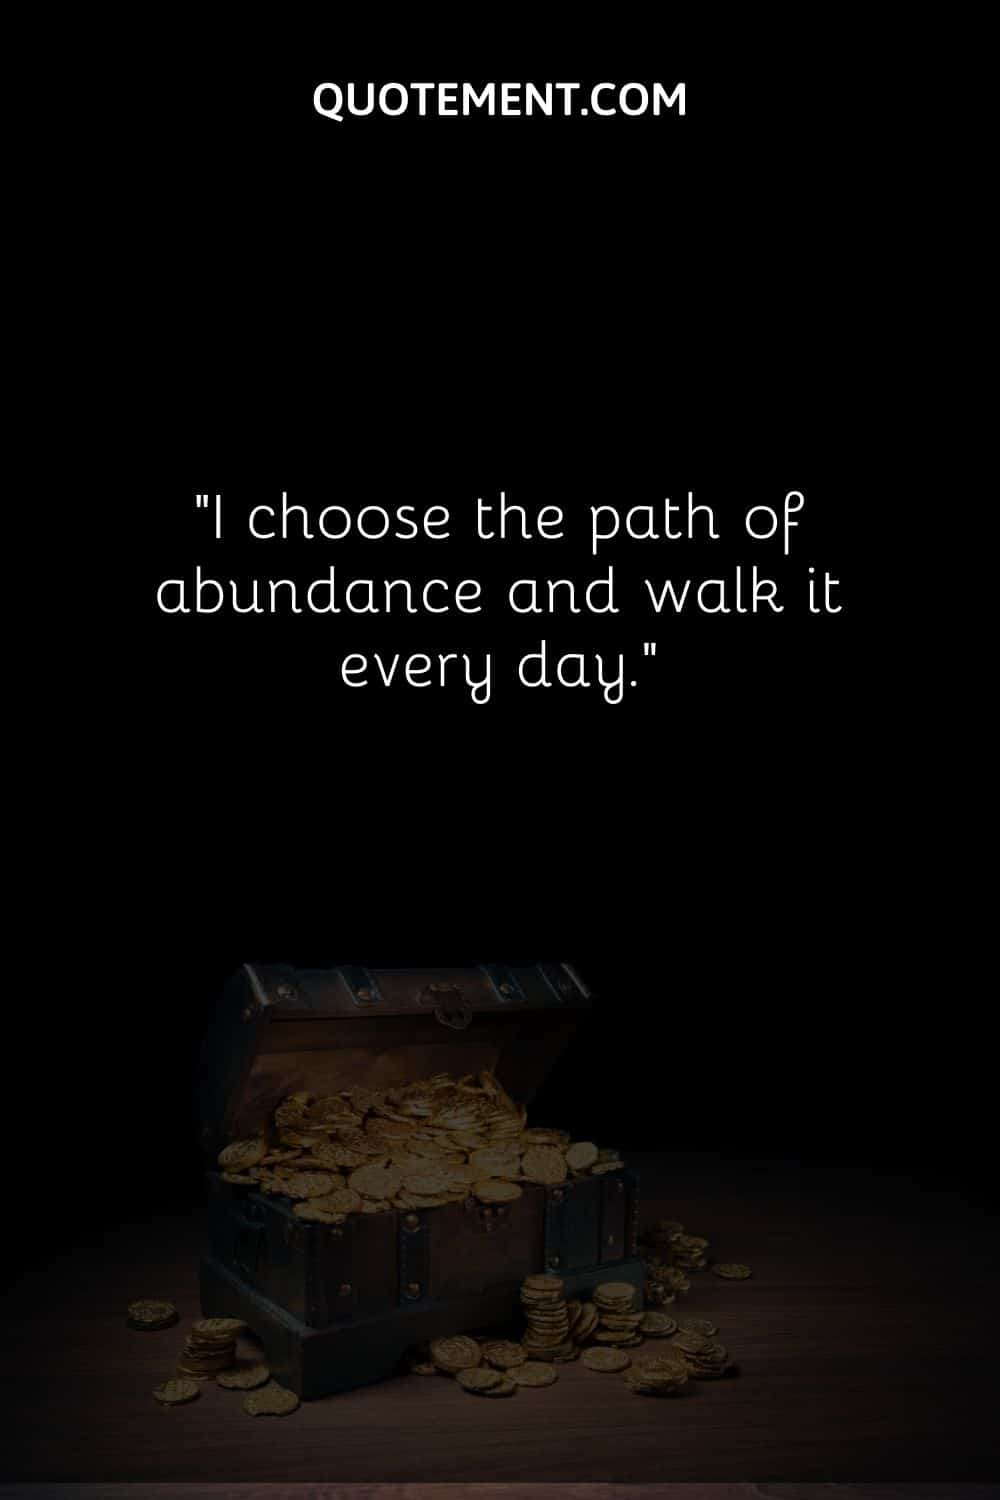 I choose the path of abundance and walk it every day